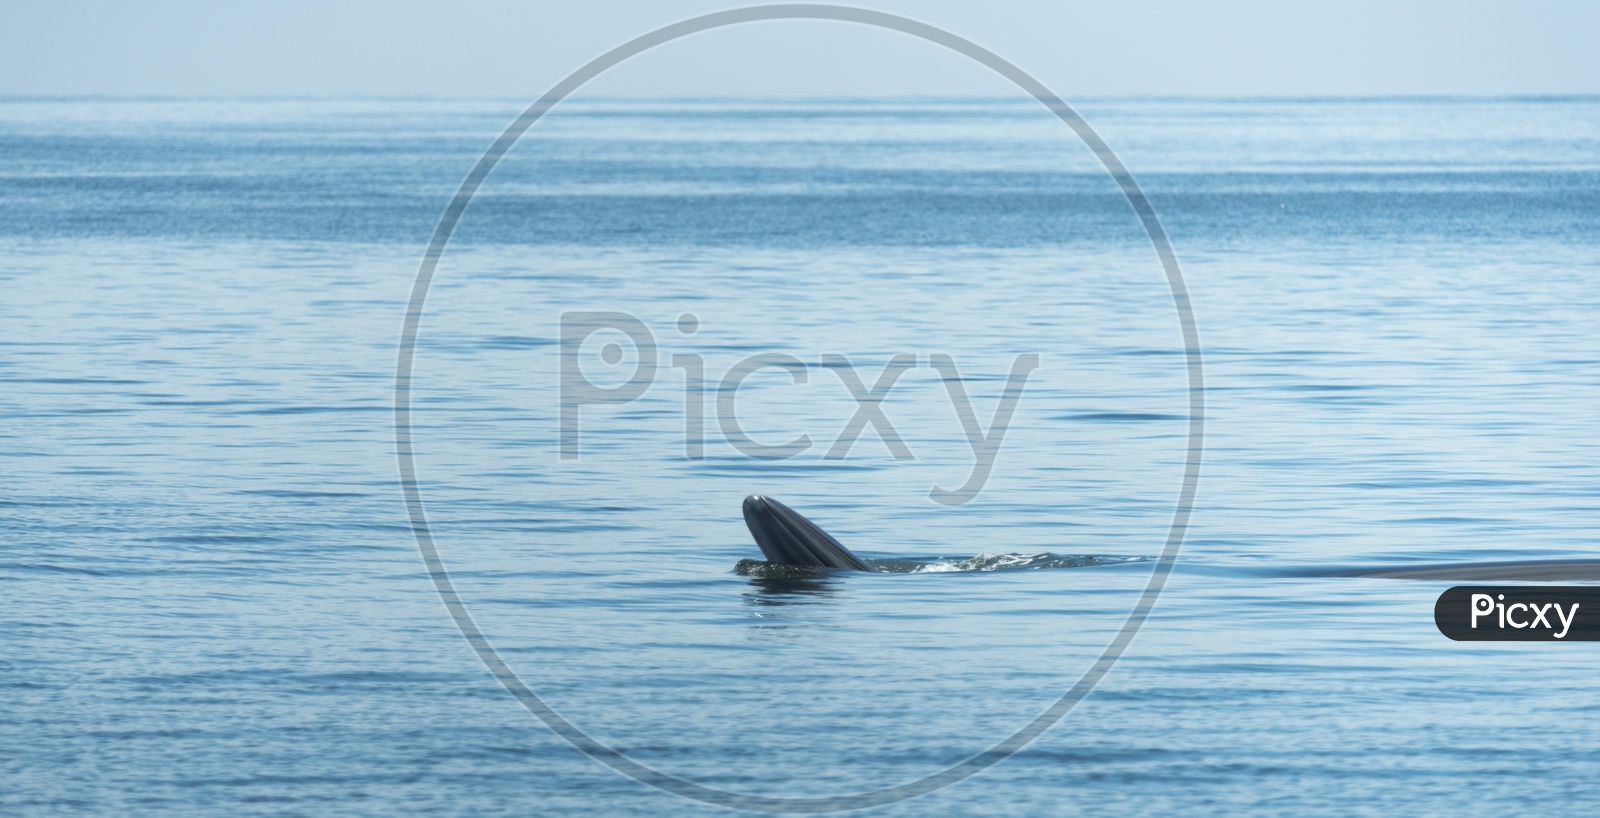 Bryde's Whale On Water Surface In a Sea To Breathe at Gulf Of Thailand